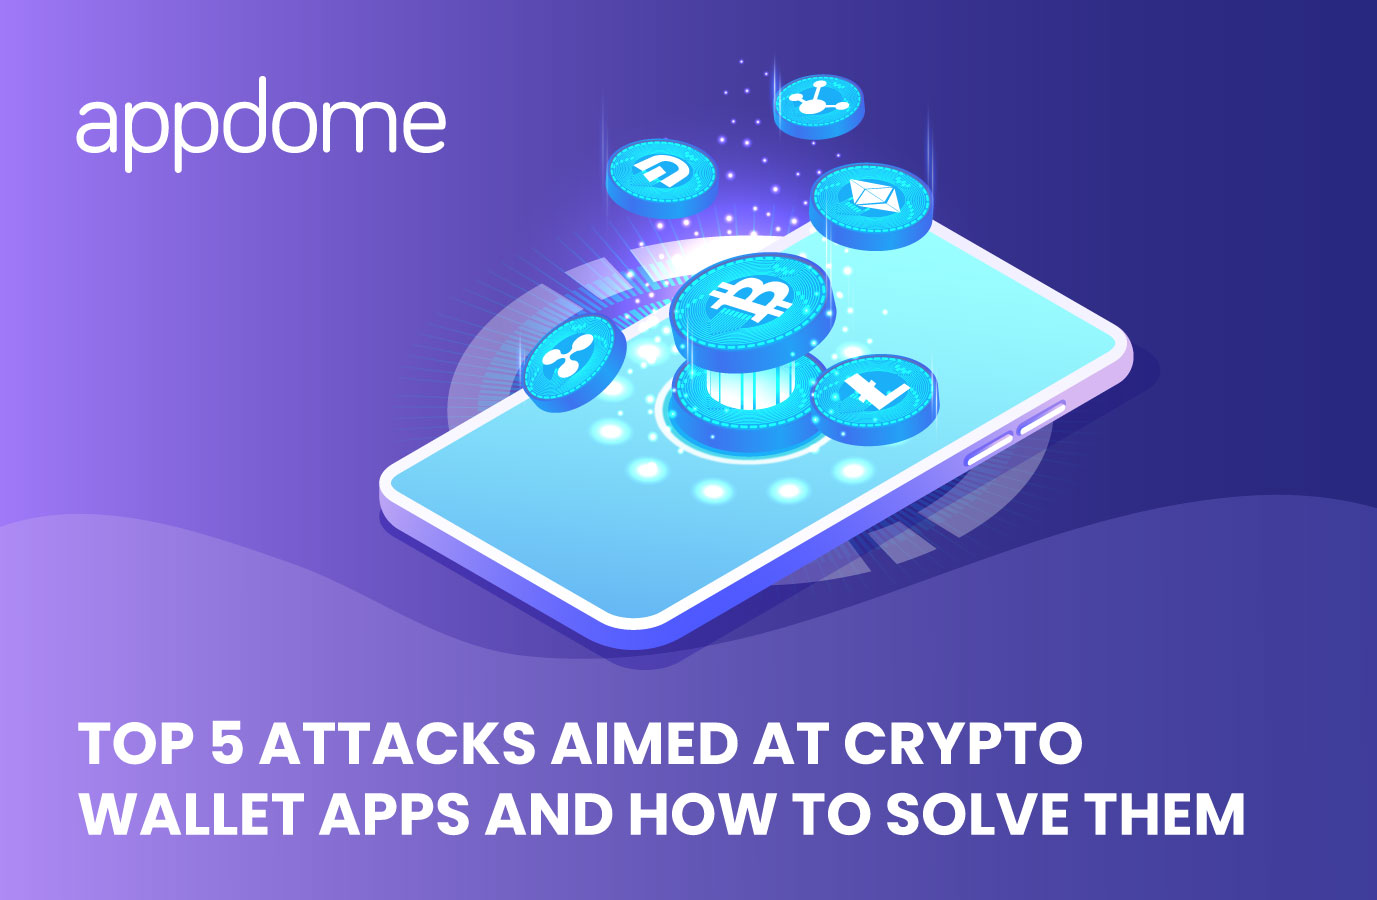 Top 5 Cyber Attacks Aimed at Crypto Wallet Apps - DevSec Blog